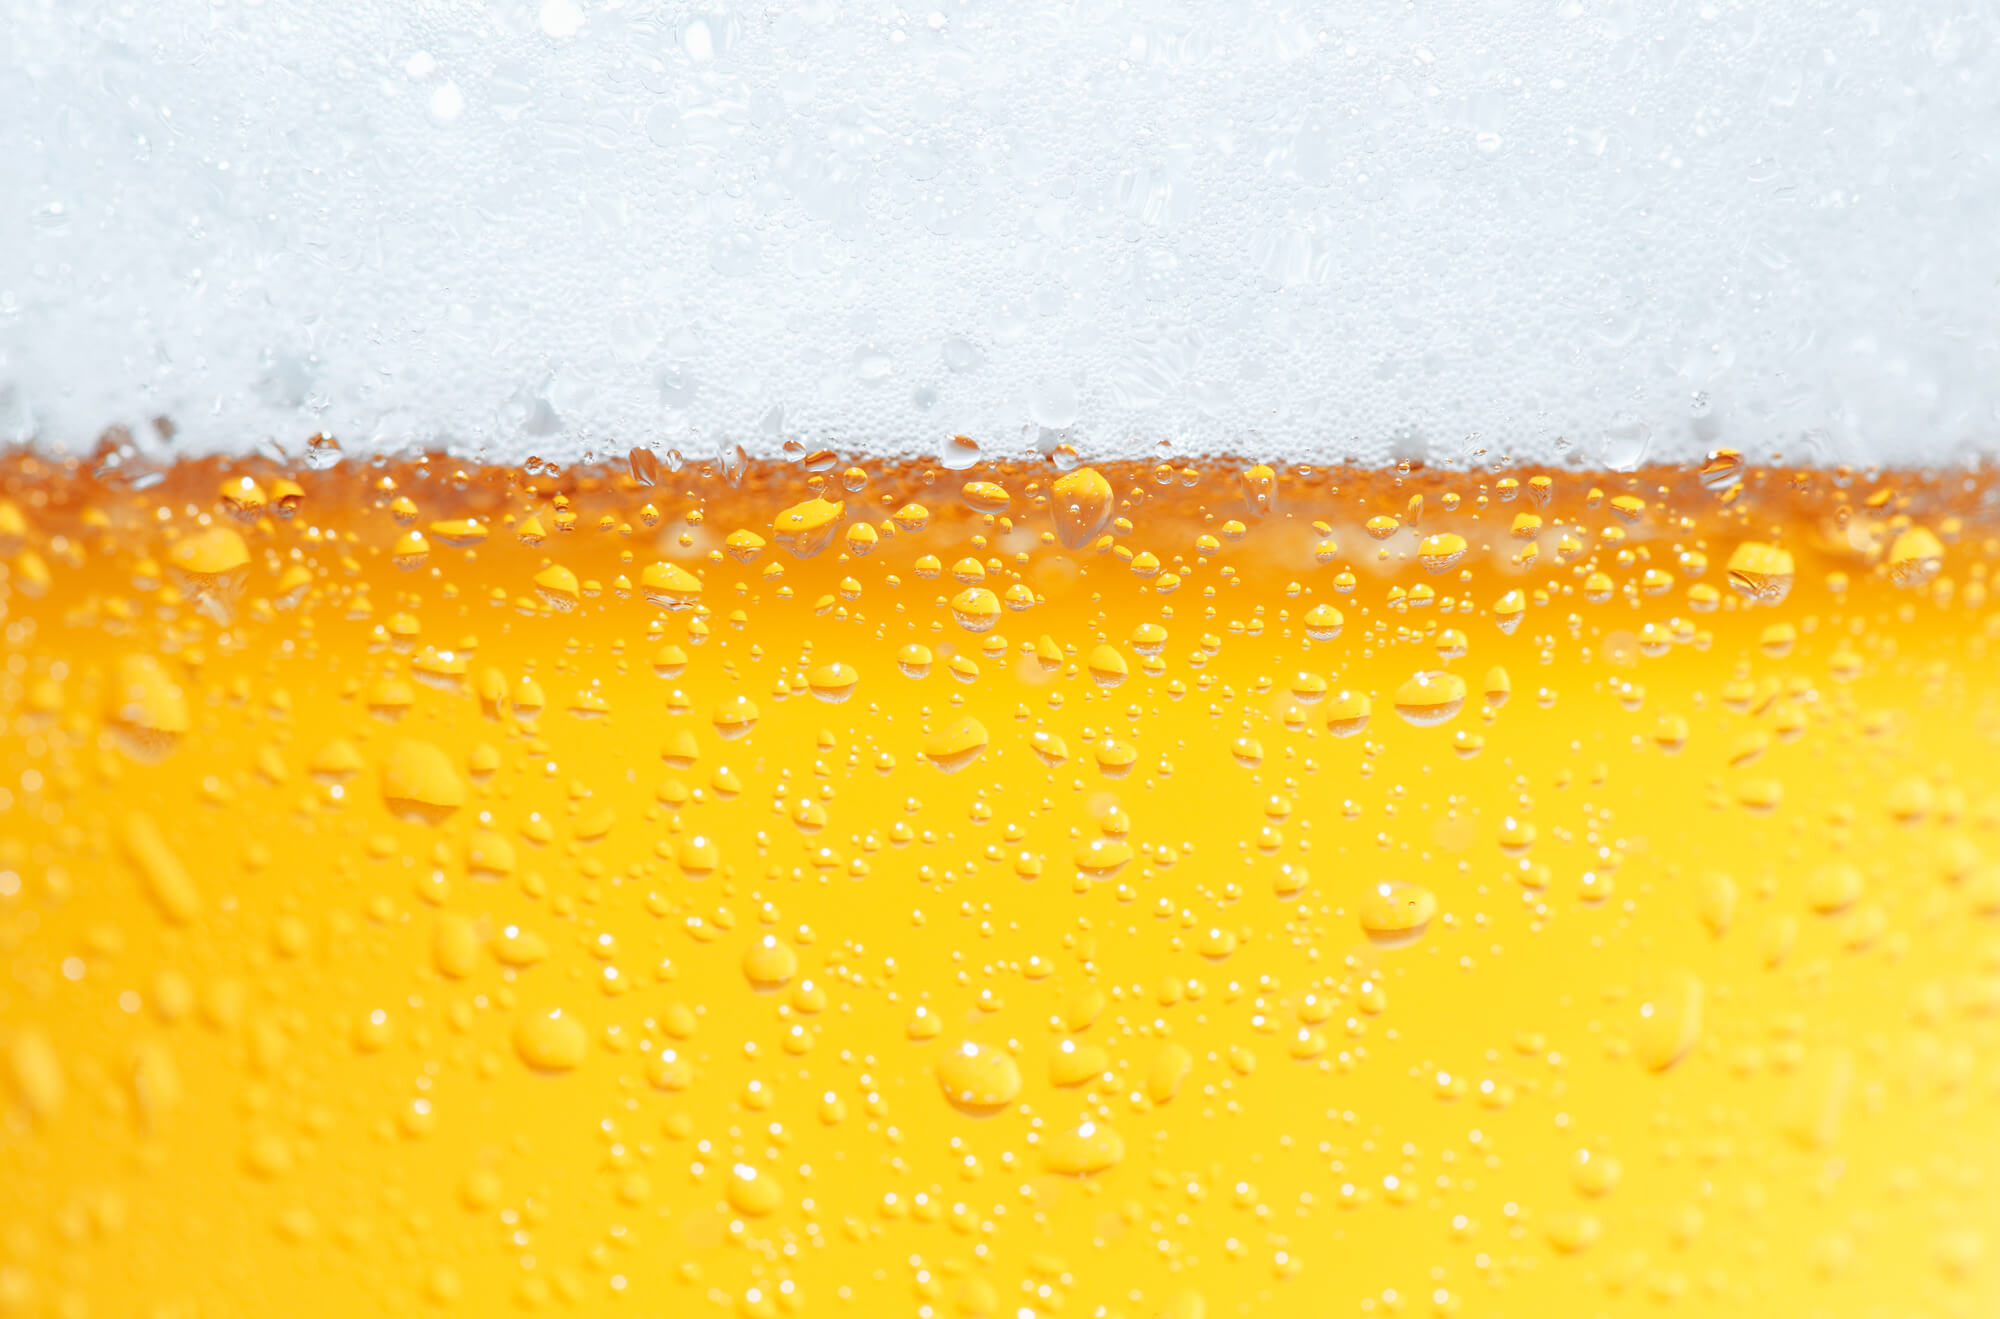 Beer Day Britain (June 15th)